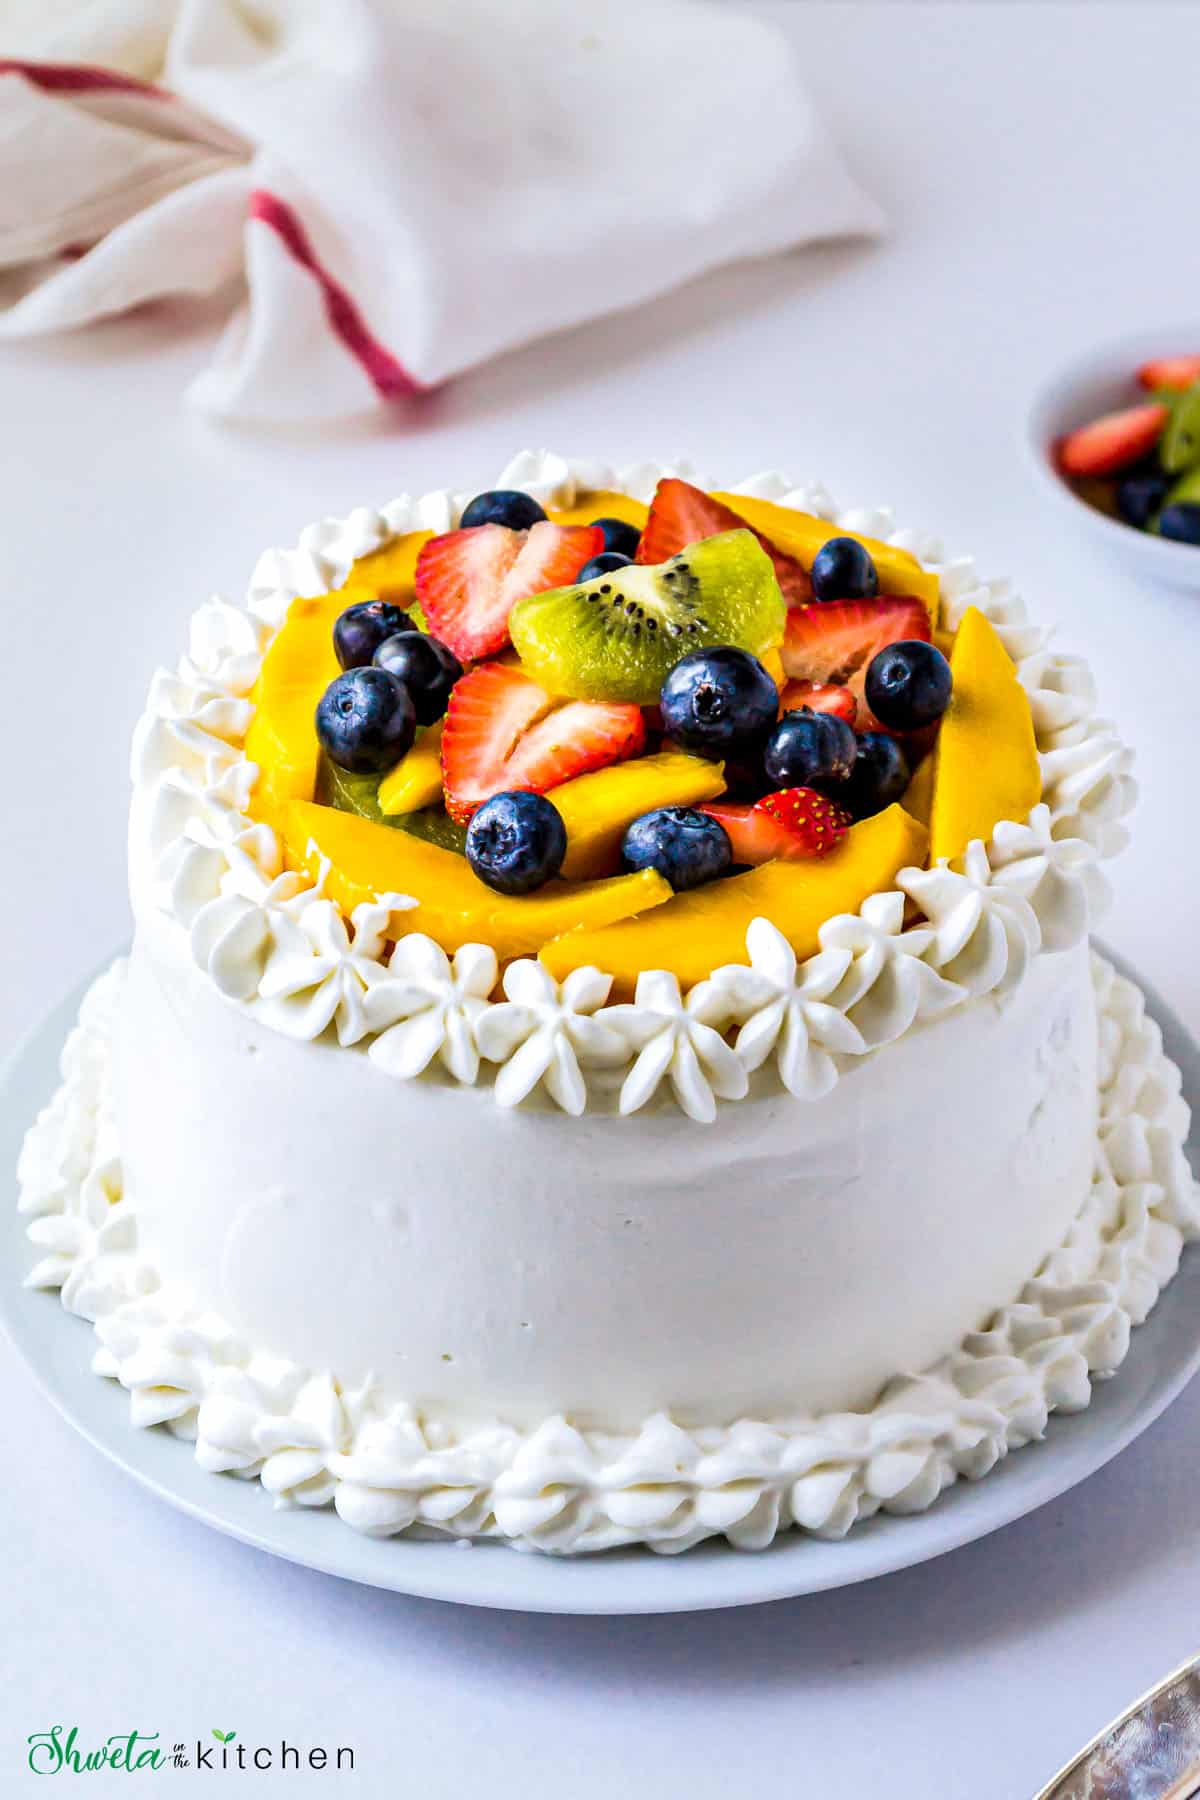 Layered Vanilla Sponge Cake frosted with Whipped Cream and topped with fresh fruits